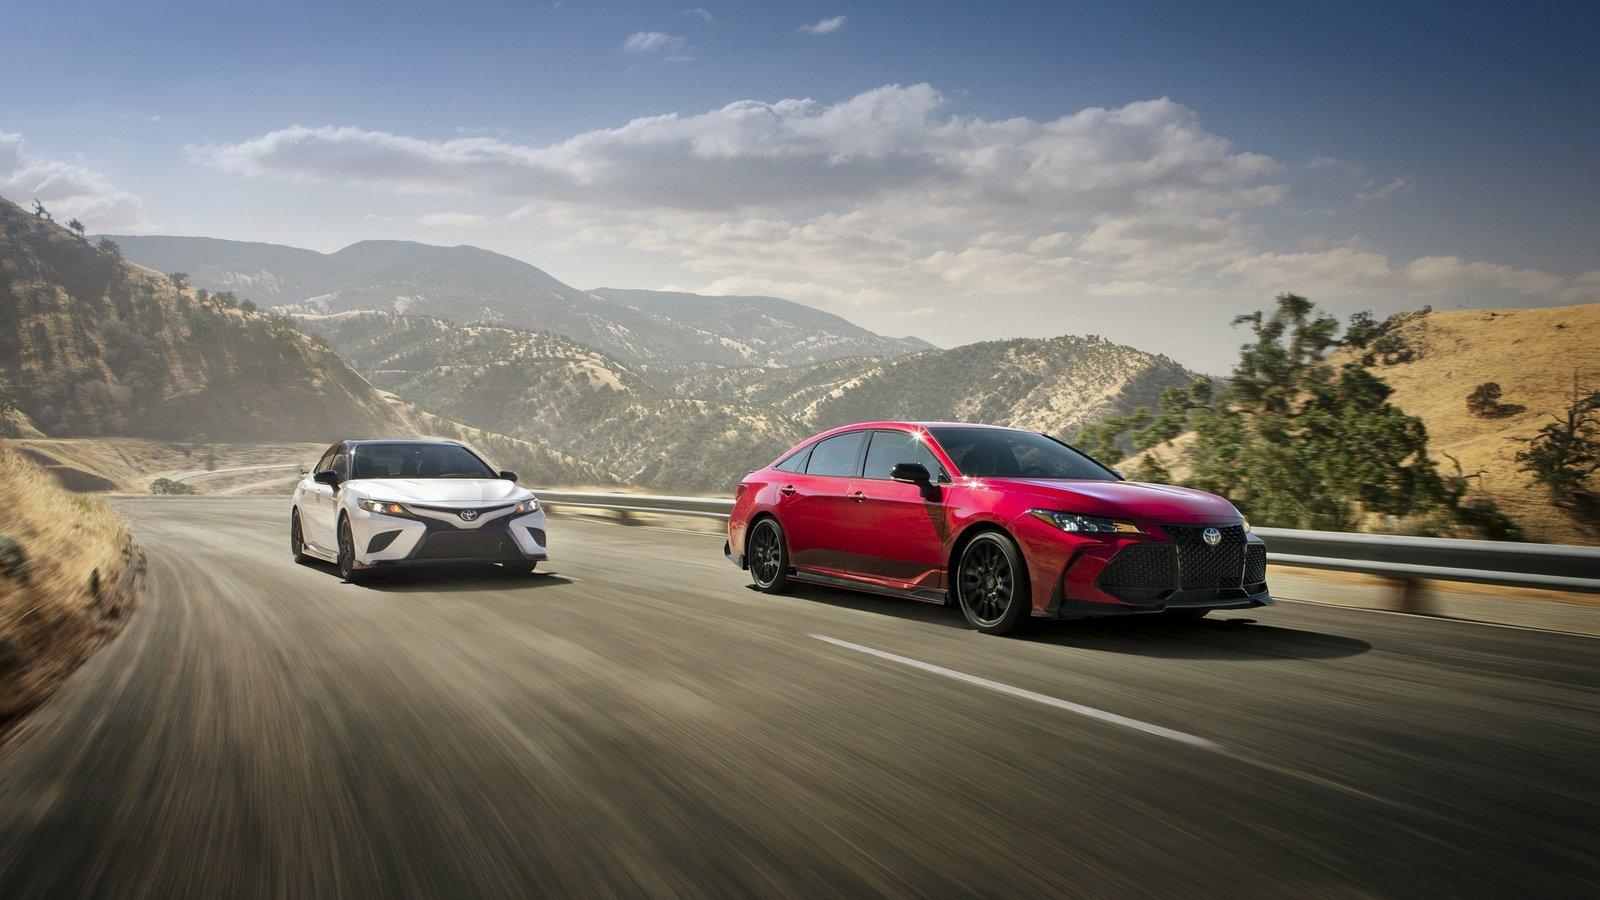 Toyota Avalon TRD And Camry TRD Picture, Photo, Wallpaper